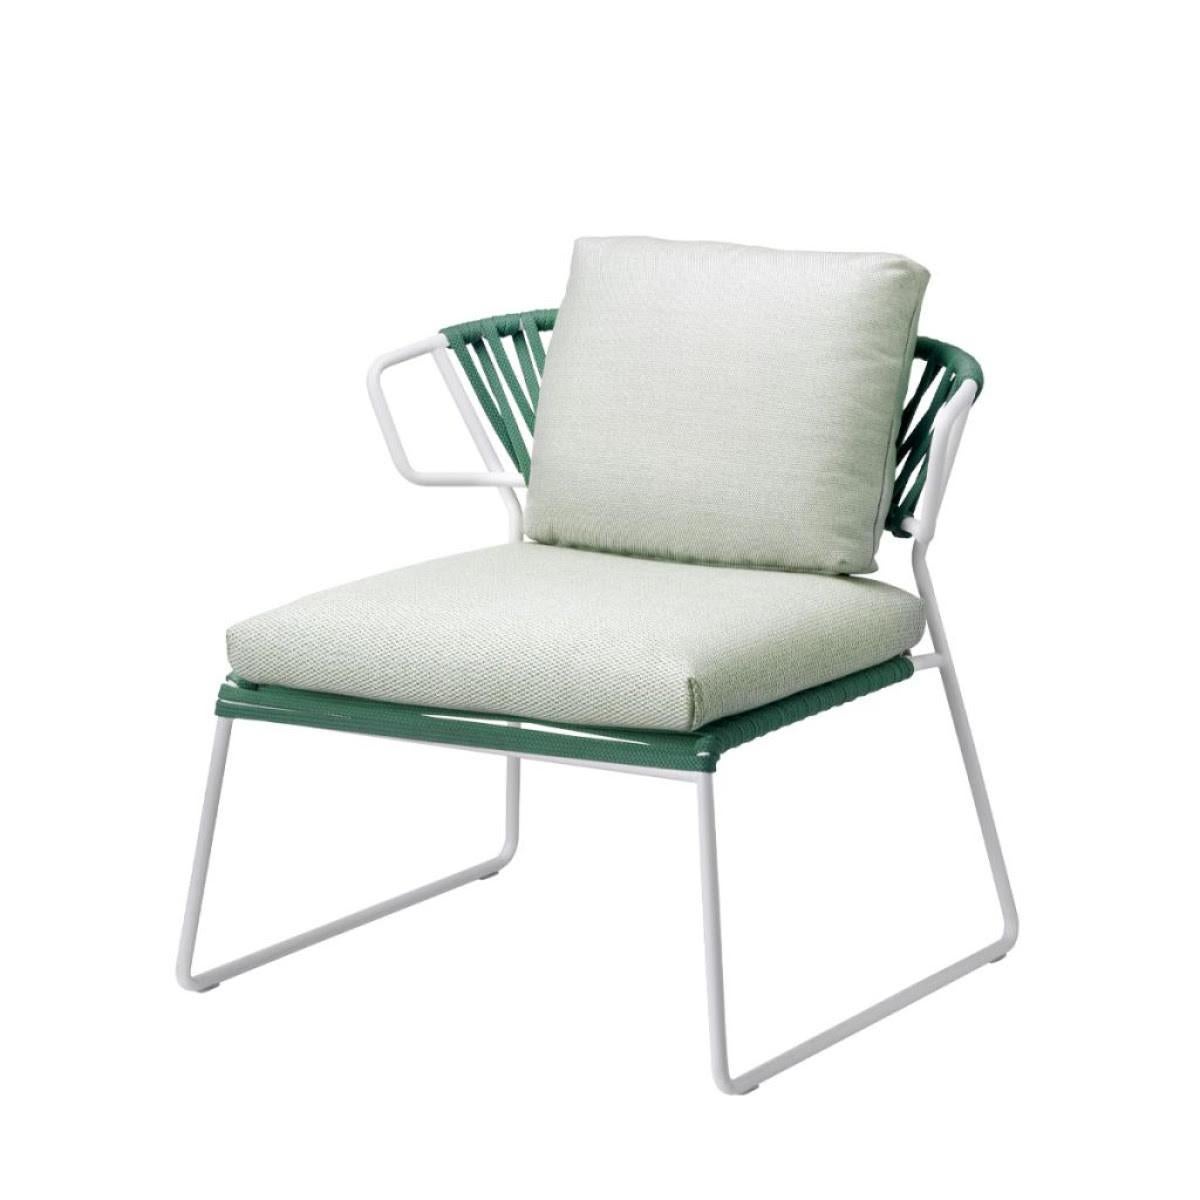 Modern Green Outdoor or Indoor Armchair in Metal and Ropes, 21 century In New Condition For Sale In Saint-Ouen, FR